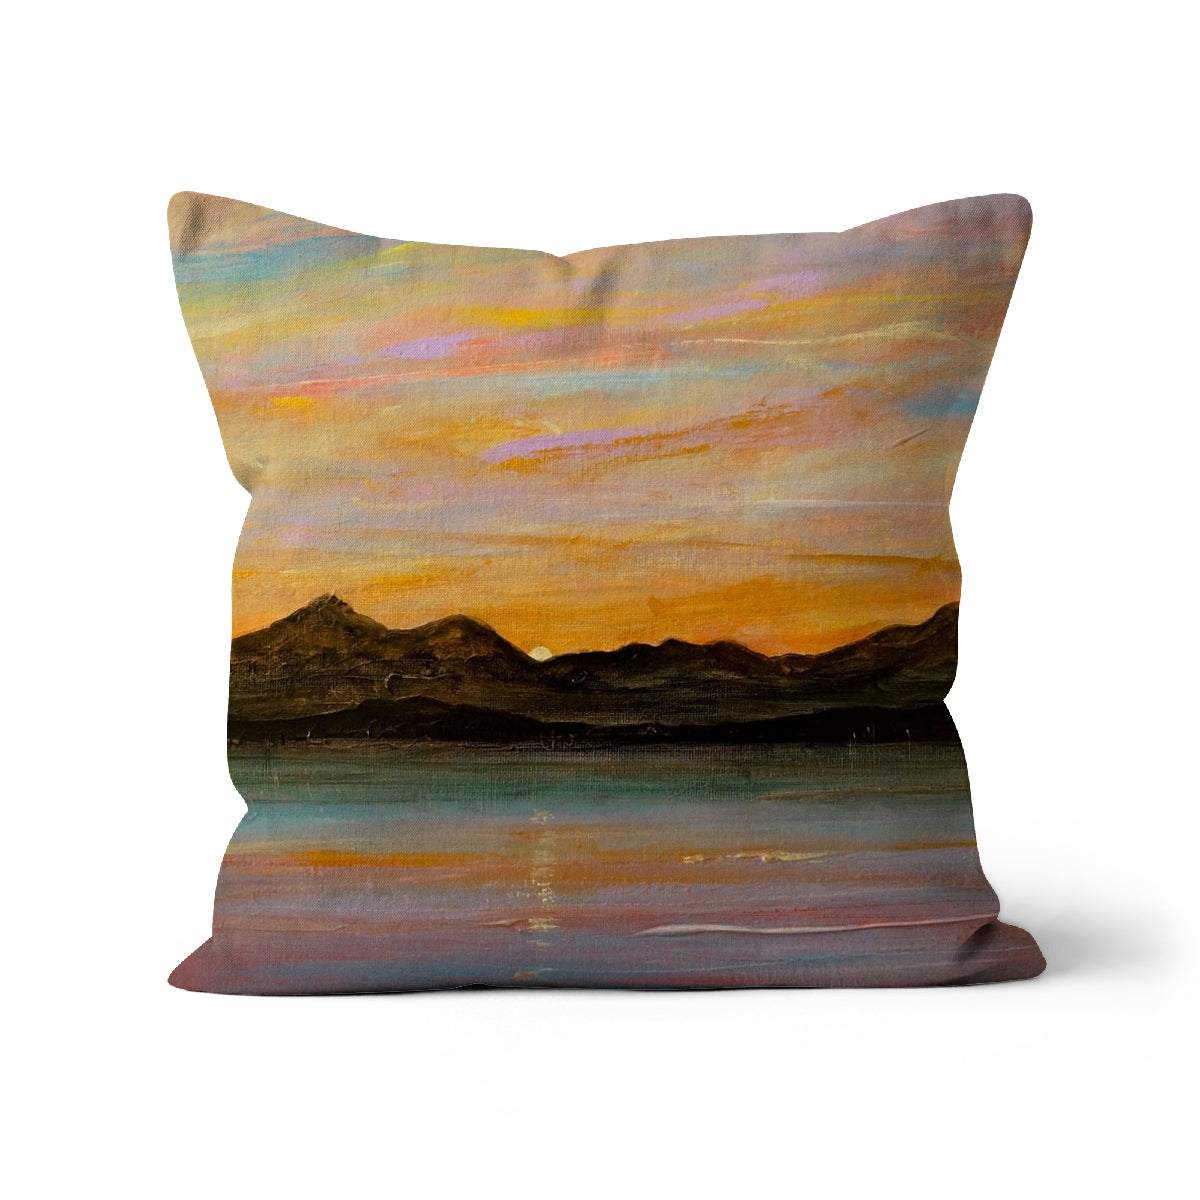 The Sleeping Warrior Arran Art Gifts Cushion-Cushions-Arran Art Gallery-Faux Suede-12"x12"-Paintings, Prints, Homeware, Art Gifts From Scotland By Scottish Artist Kevin Hunter